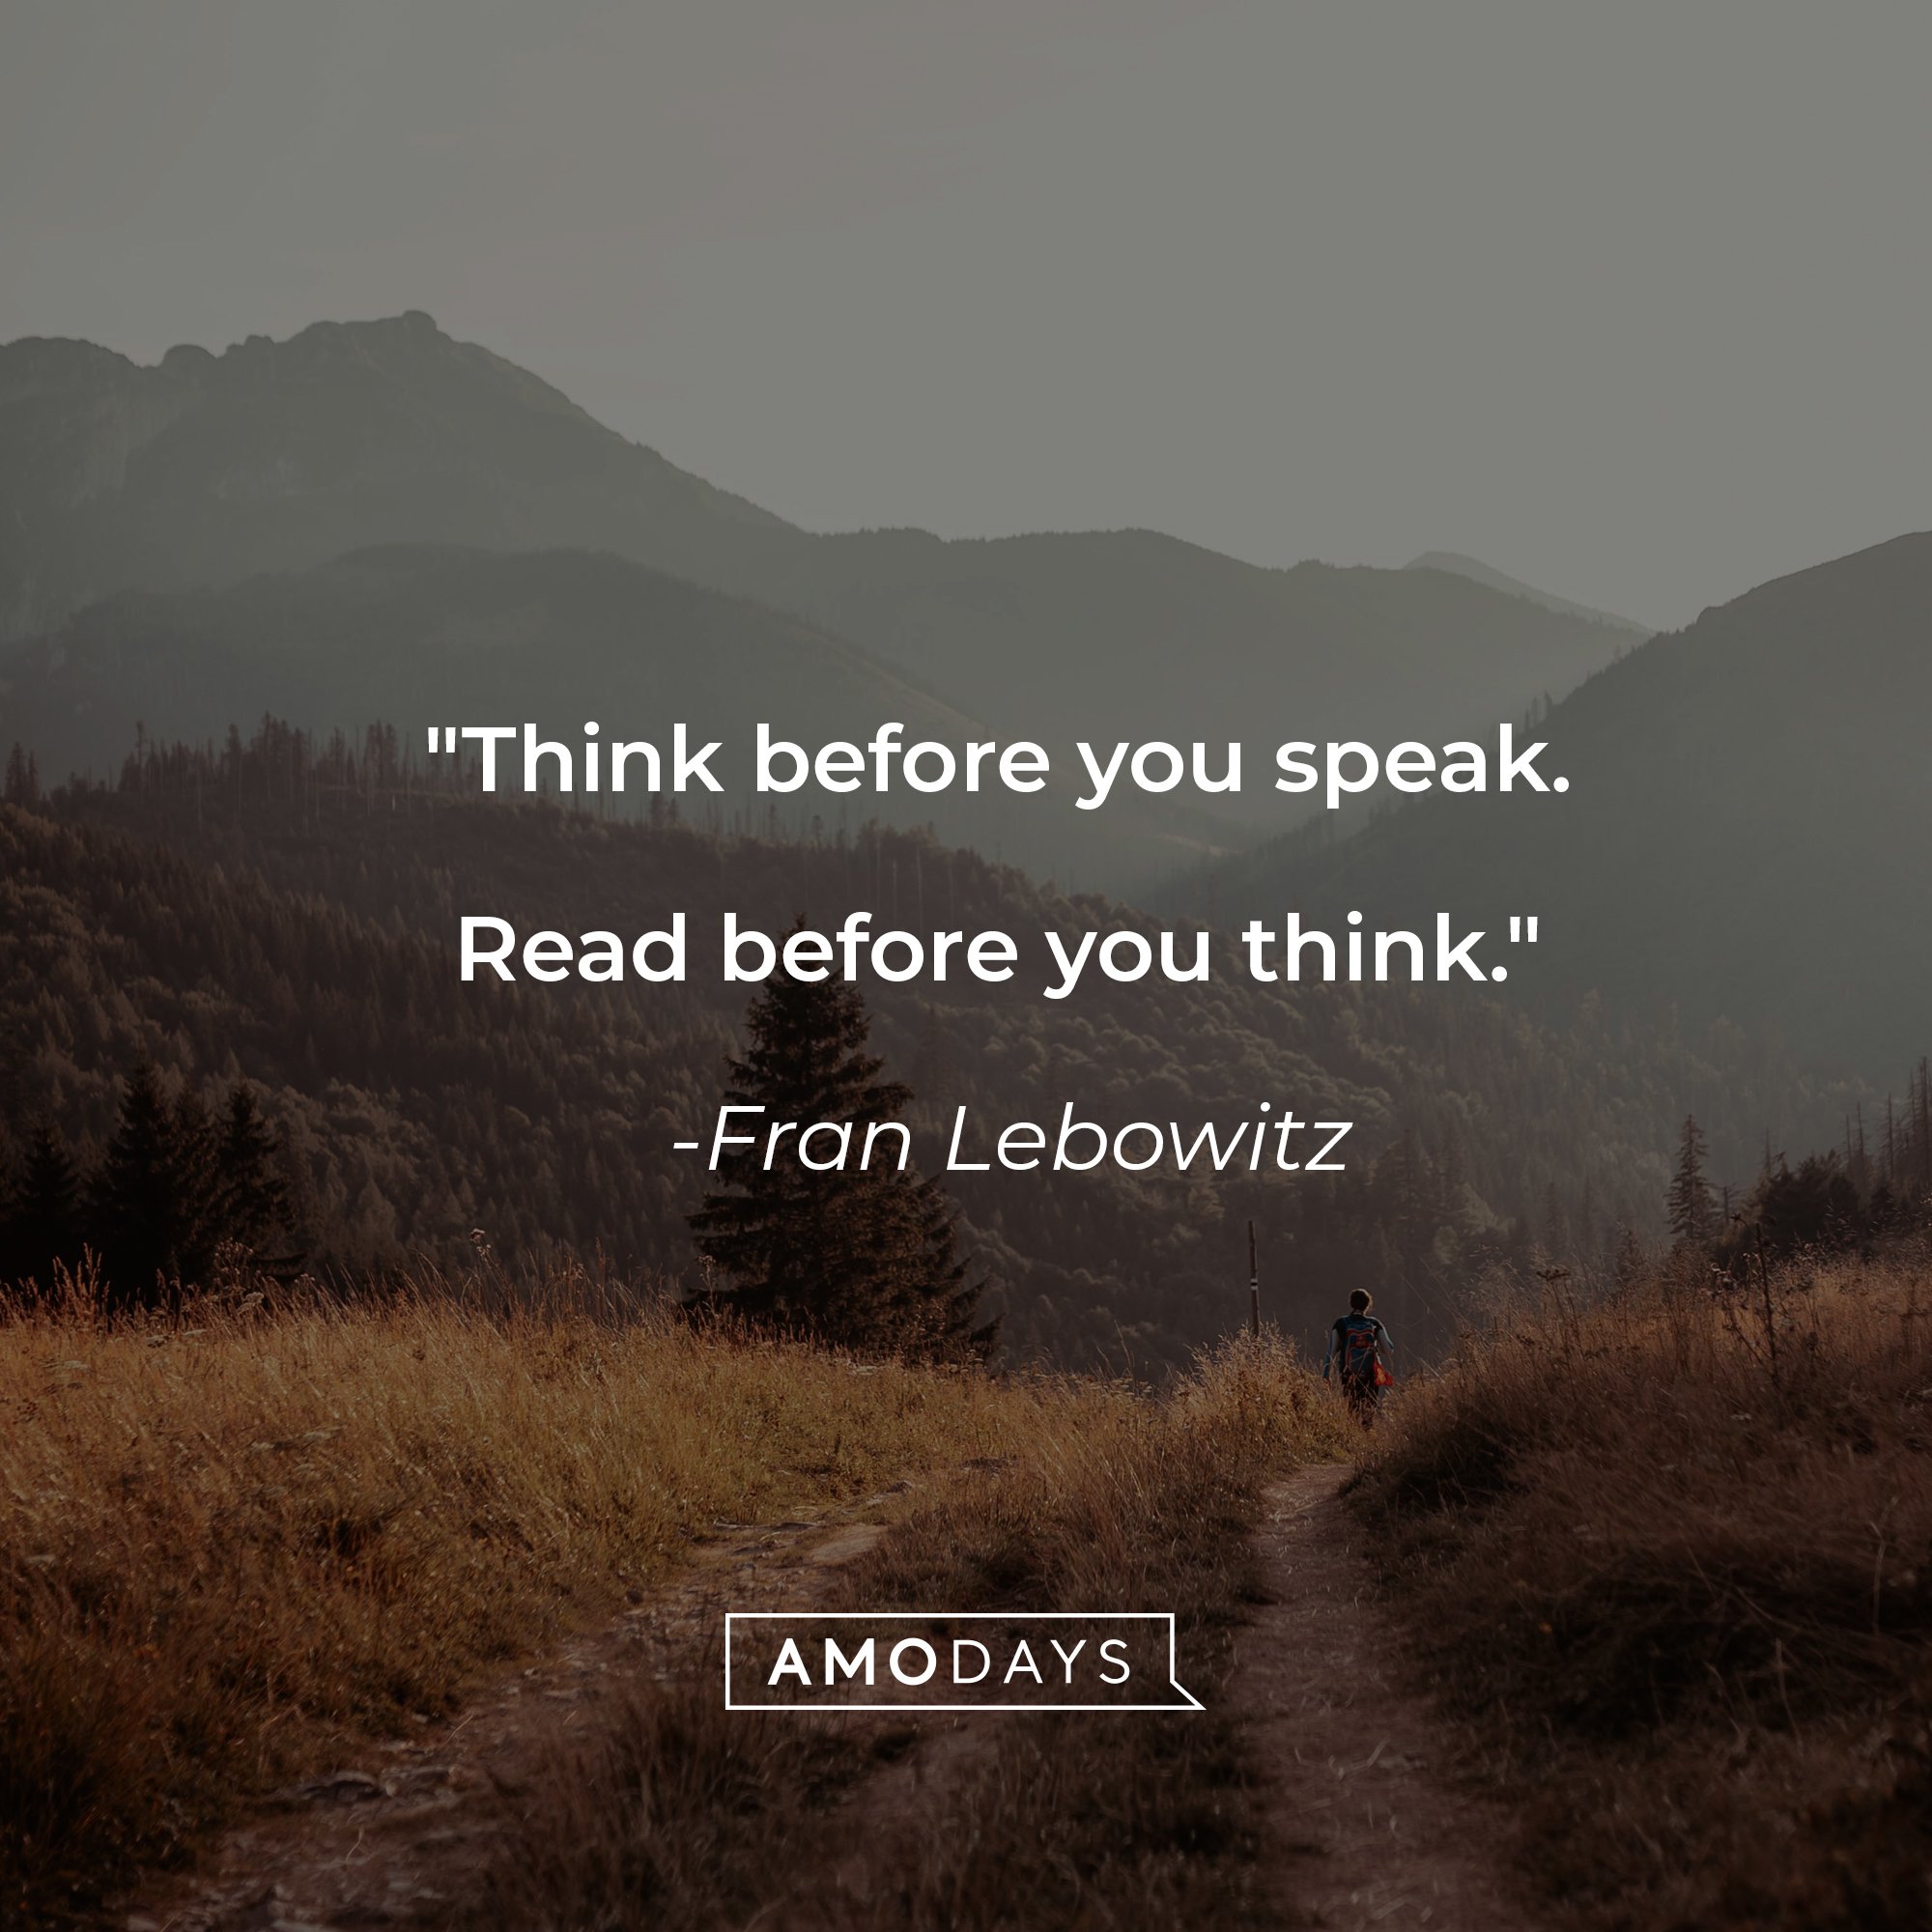 Fran Lebowitz's quote: "Think before you speak. Read before you think." | Image: AmoDays